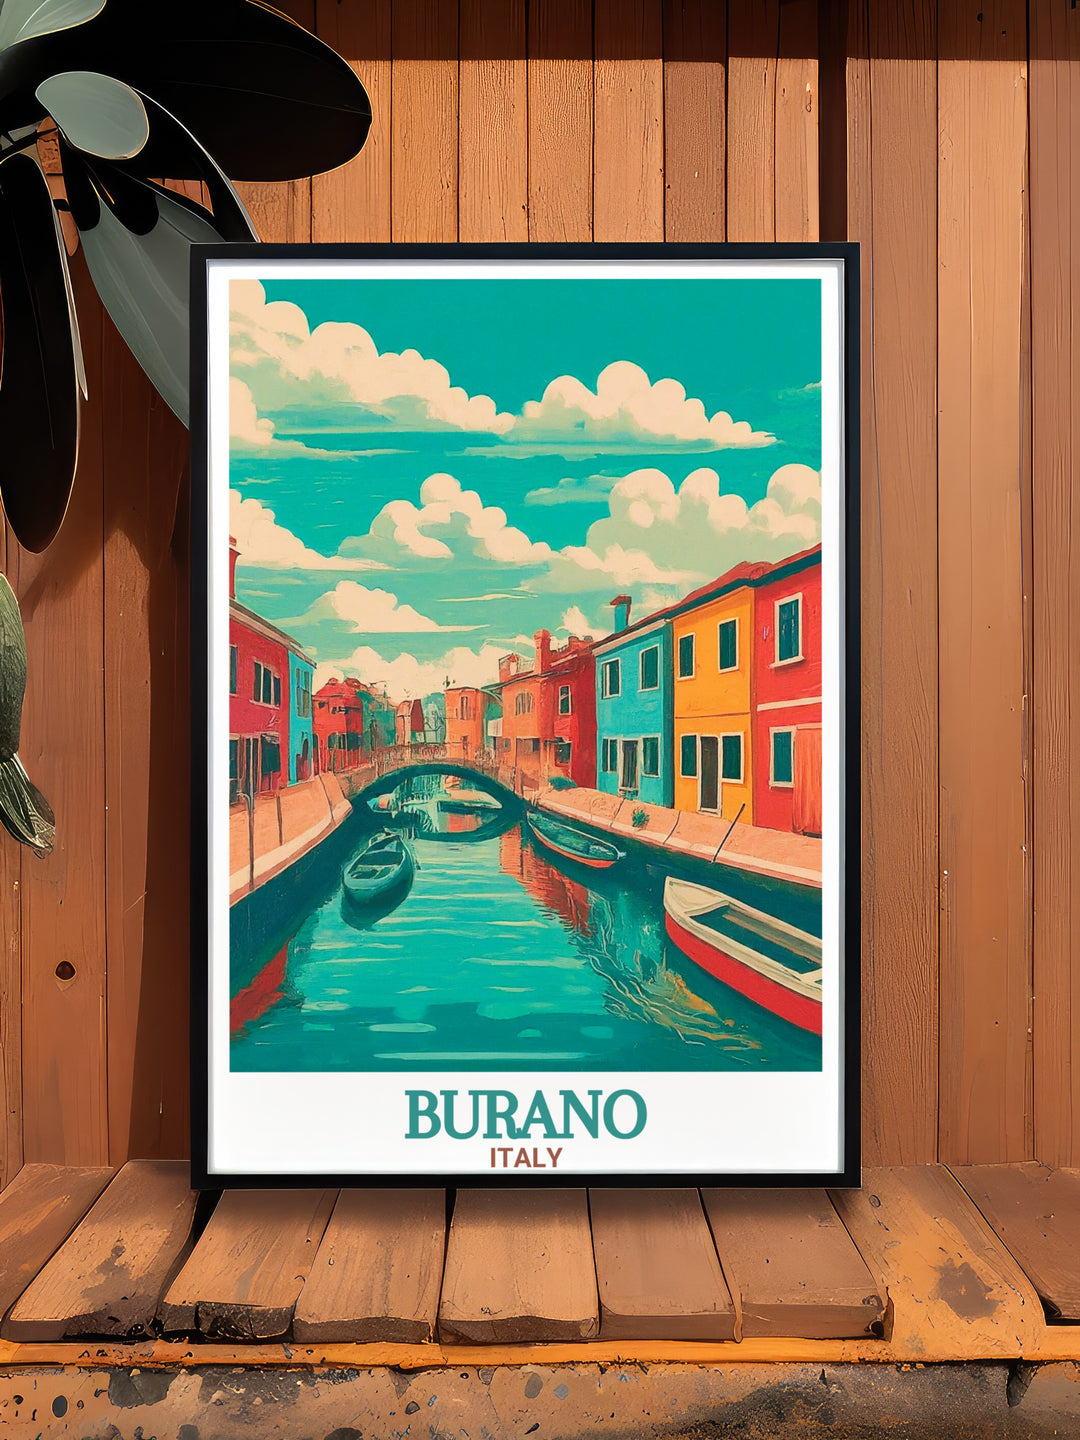 Unique Burano wall art capturing the vibrant cityscape and Canals and Bridges of Burano. This Burano artwork is a perfect addition to any room bringing a sense of Italian elegance and colorful beauty to your home decor.